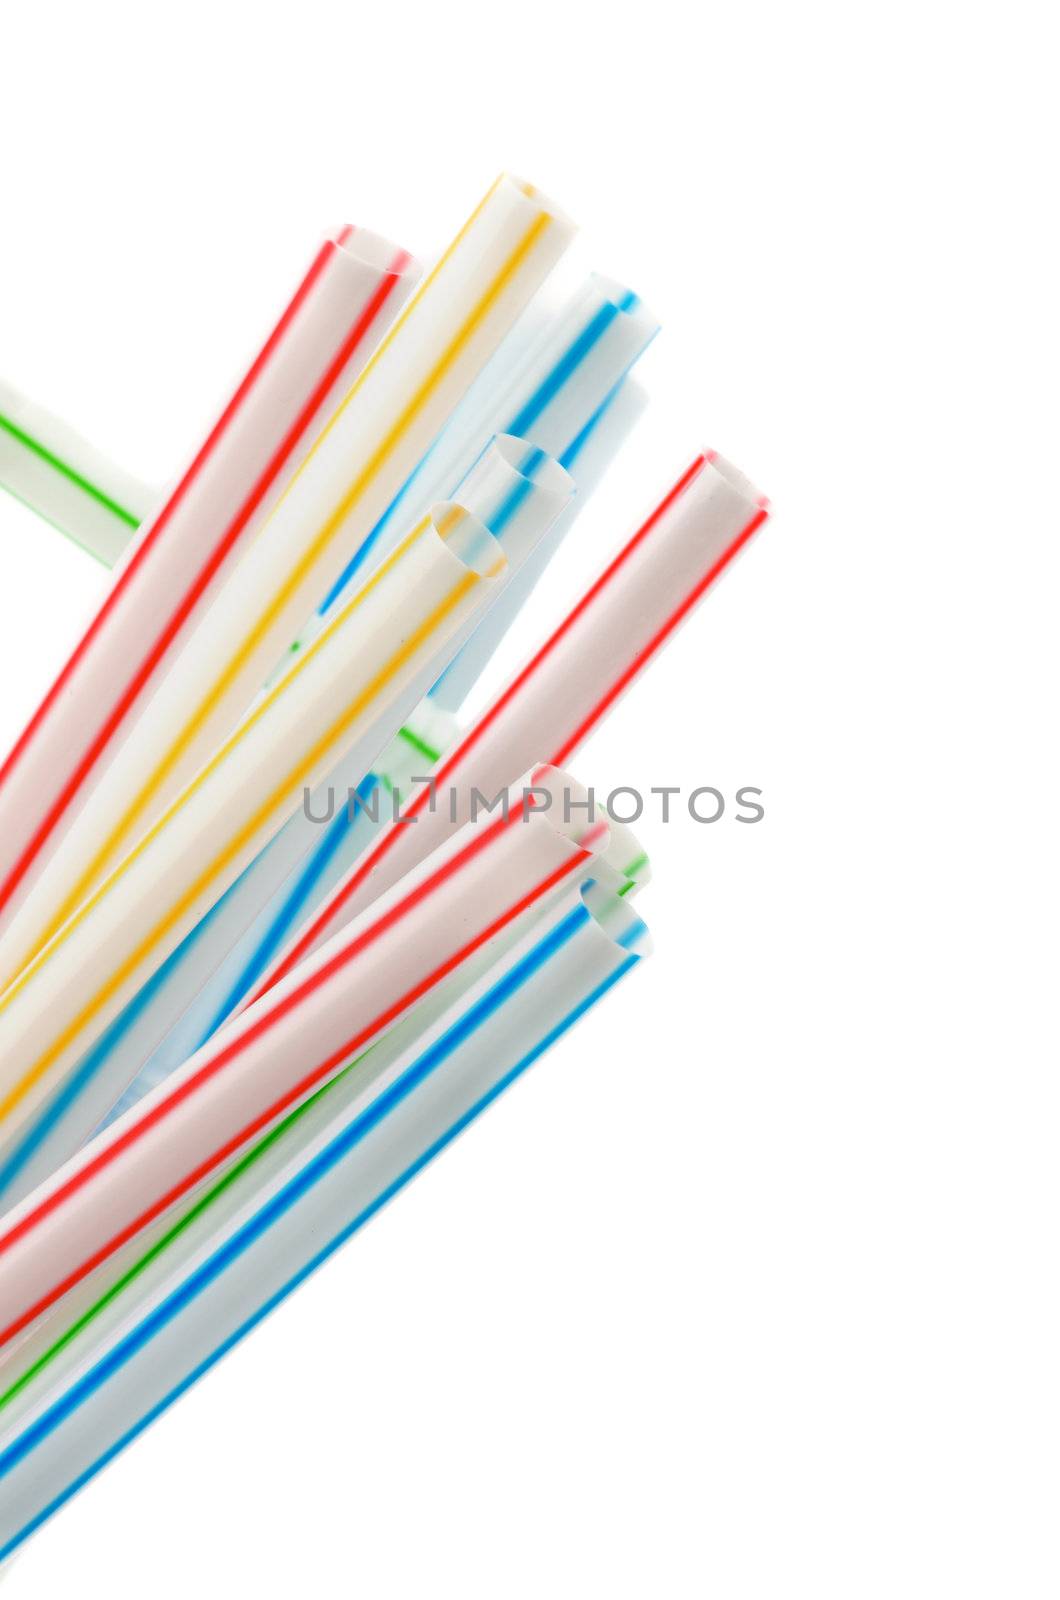 Heap of Striped Drinking Straws closeup on white background